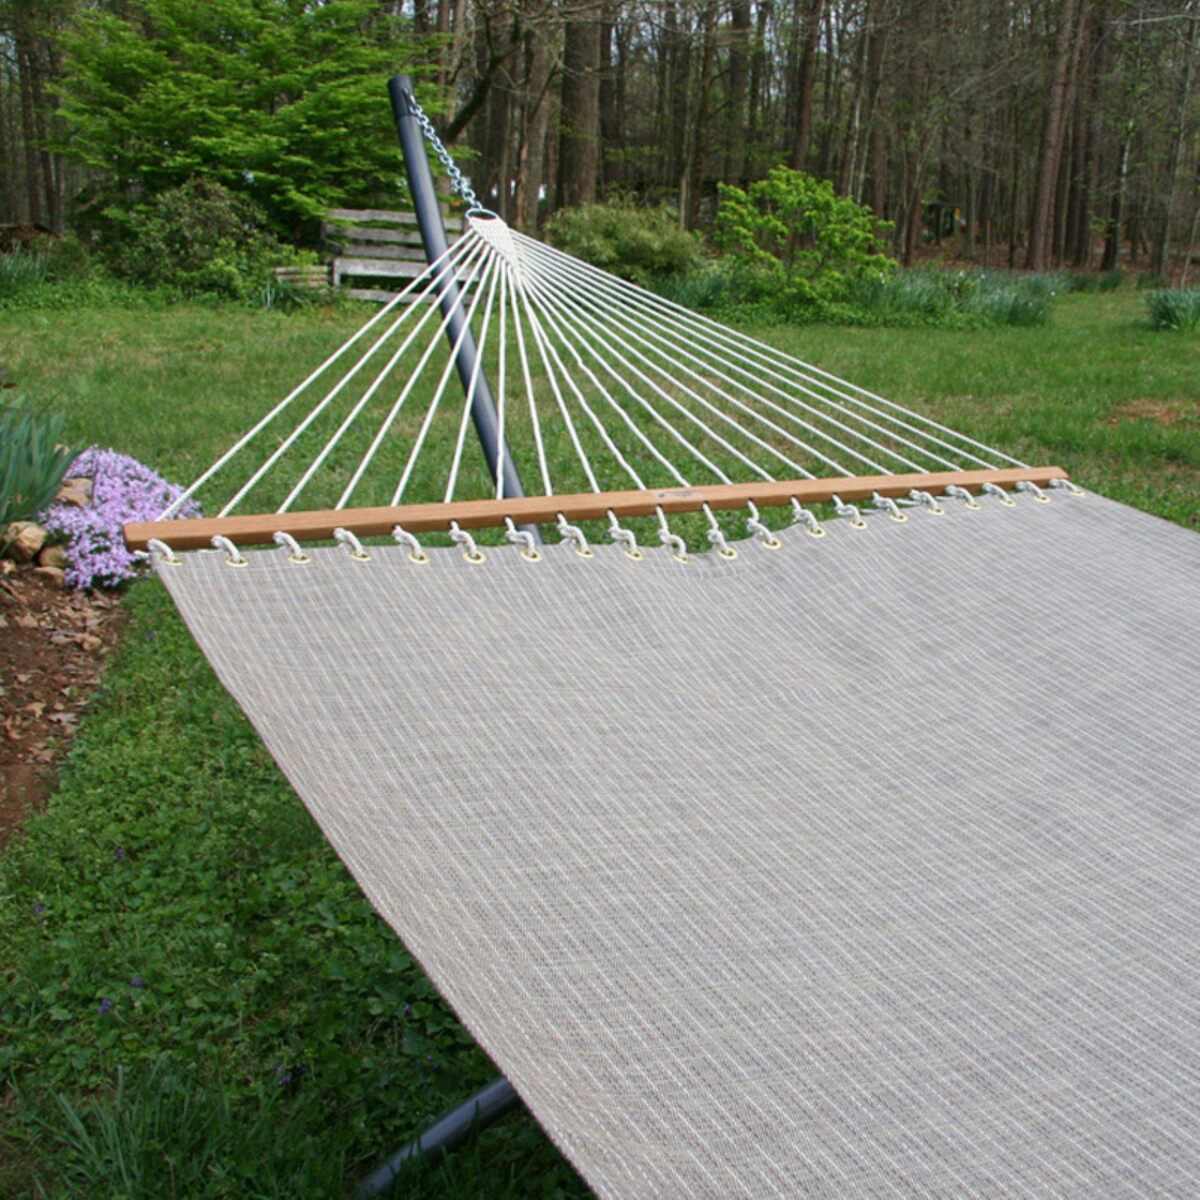 How To Get Mold Out Of A Hammock